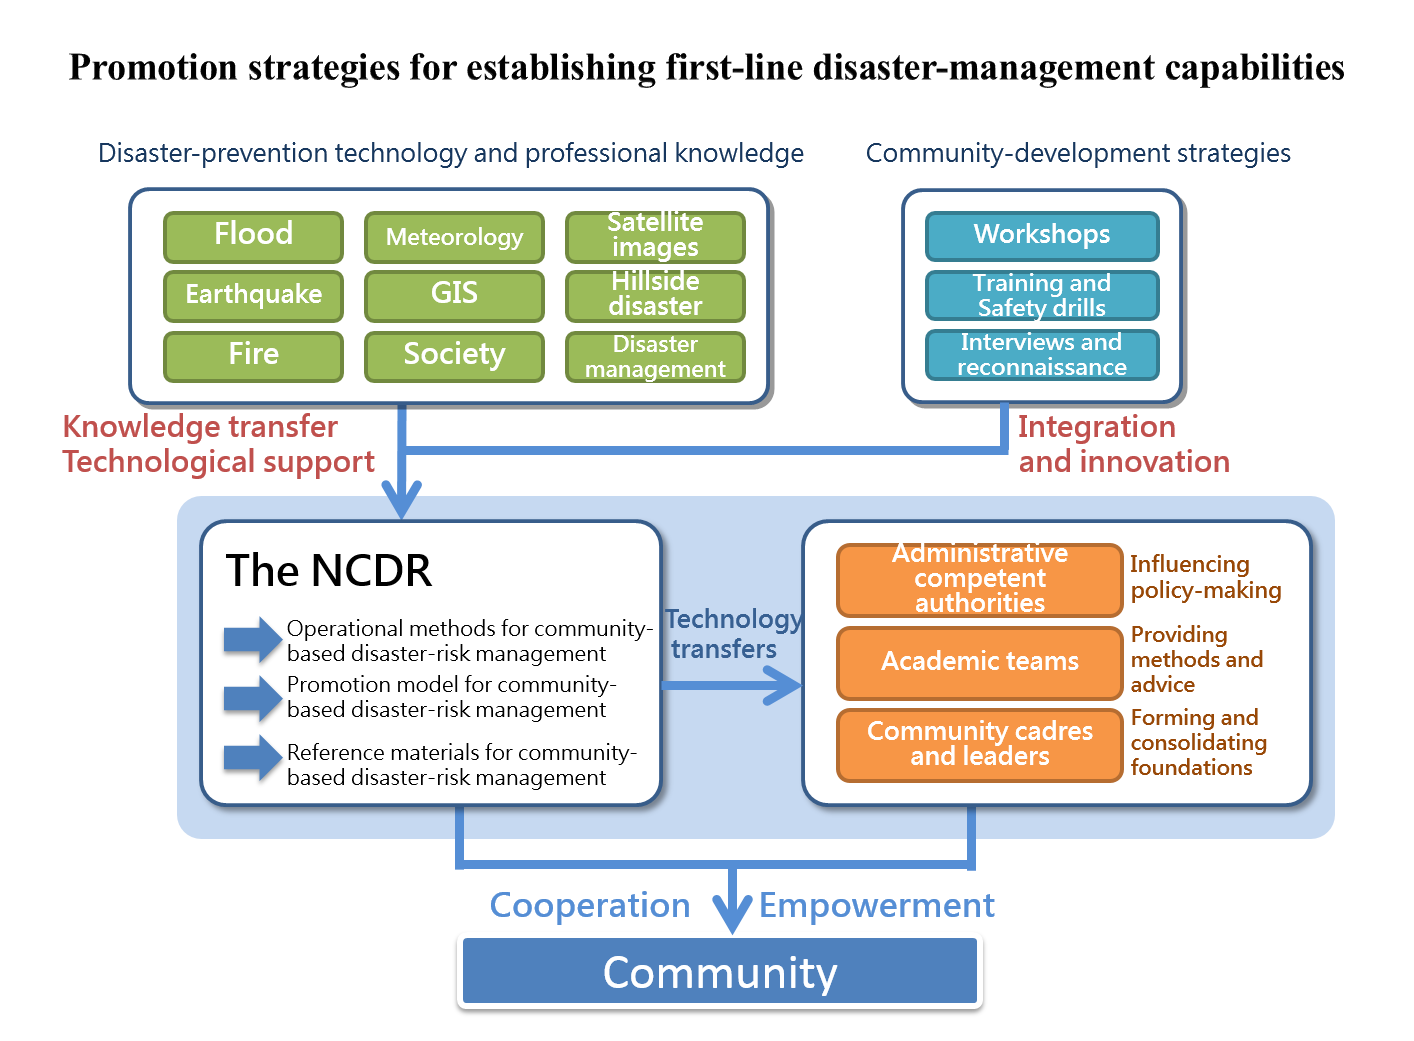 The role of NCDR in promoting CBDRM